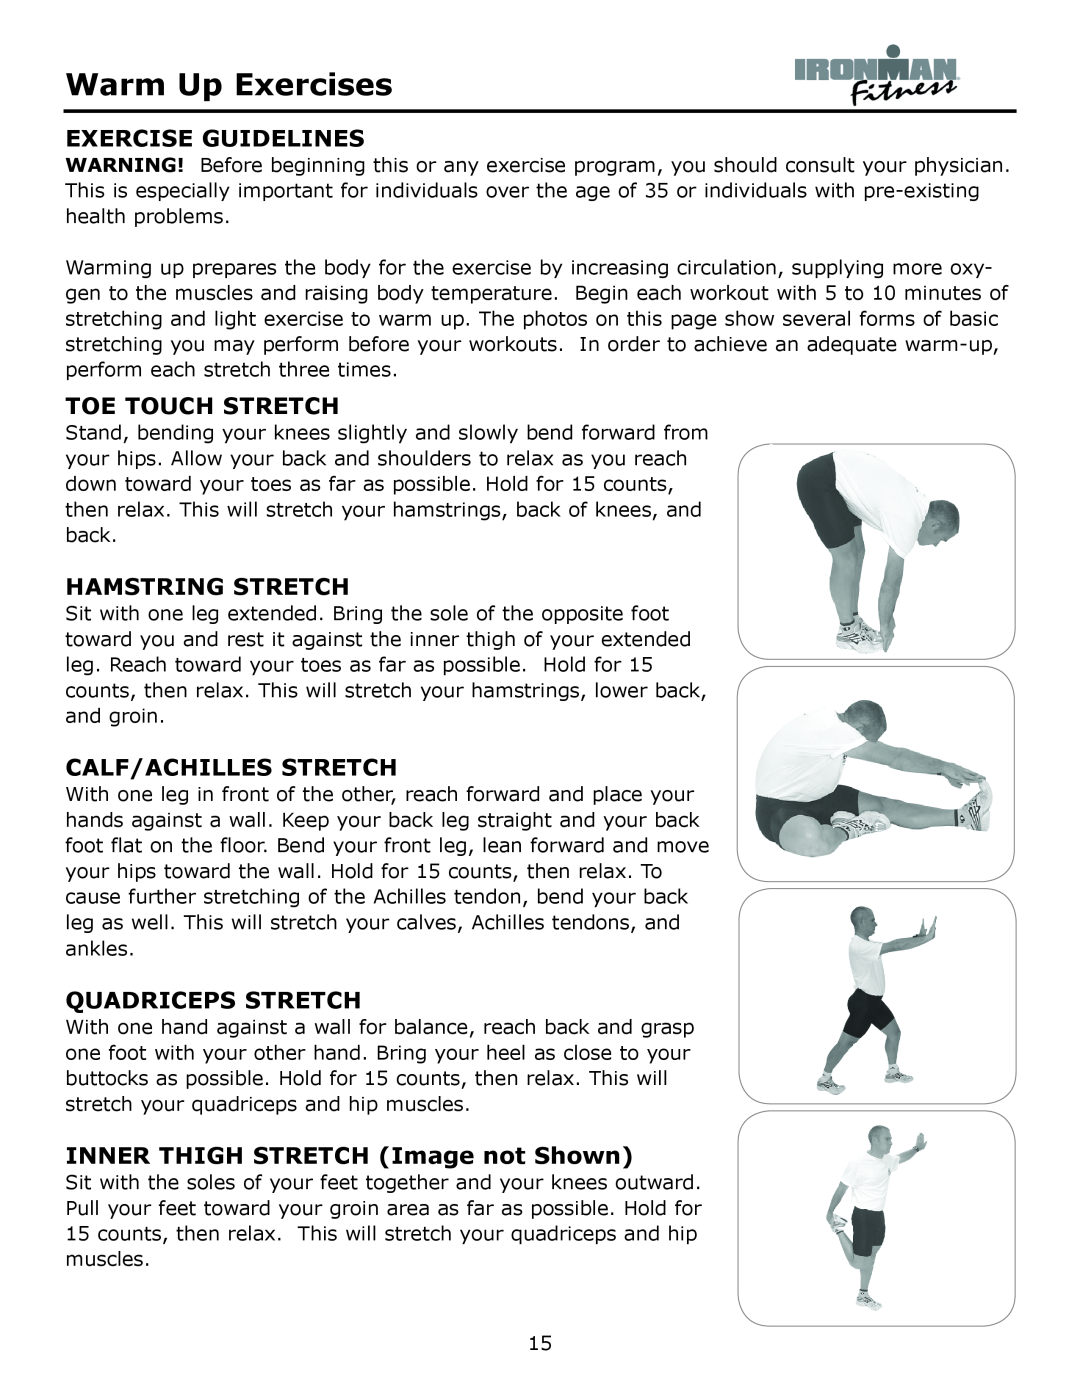 Ironman Fitness Aeros Warm Up Exercises, Exercise Guidelines, Toe Touch Stretch, Hamstring Stretch, Calf/Achilles Stretch 